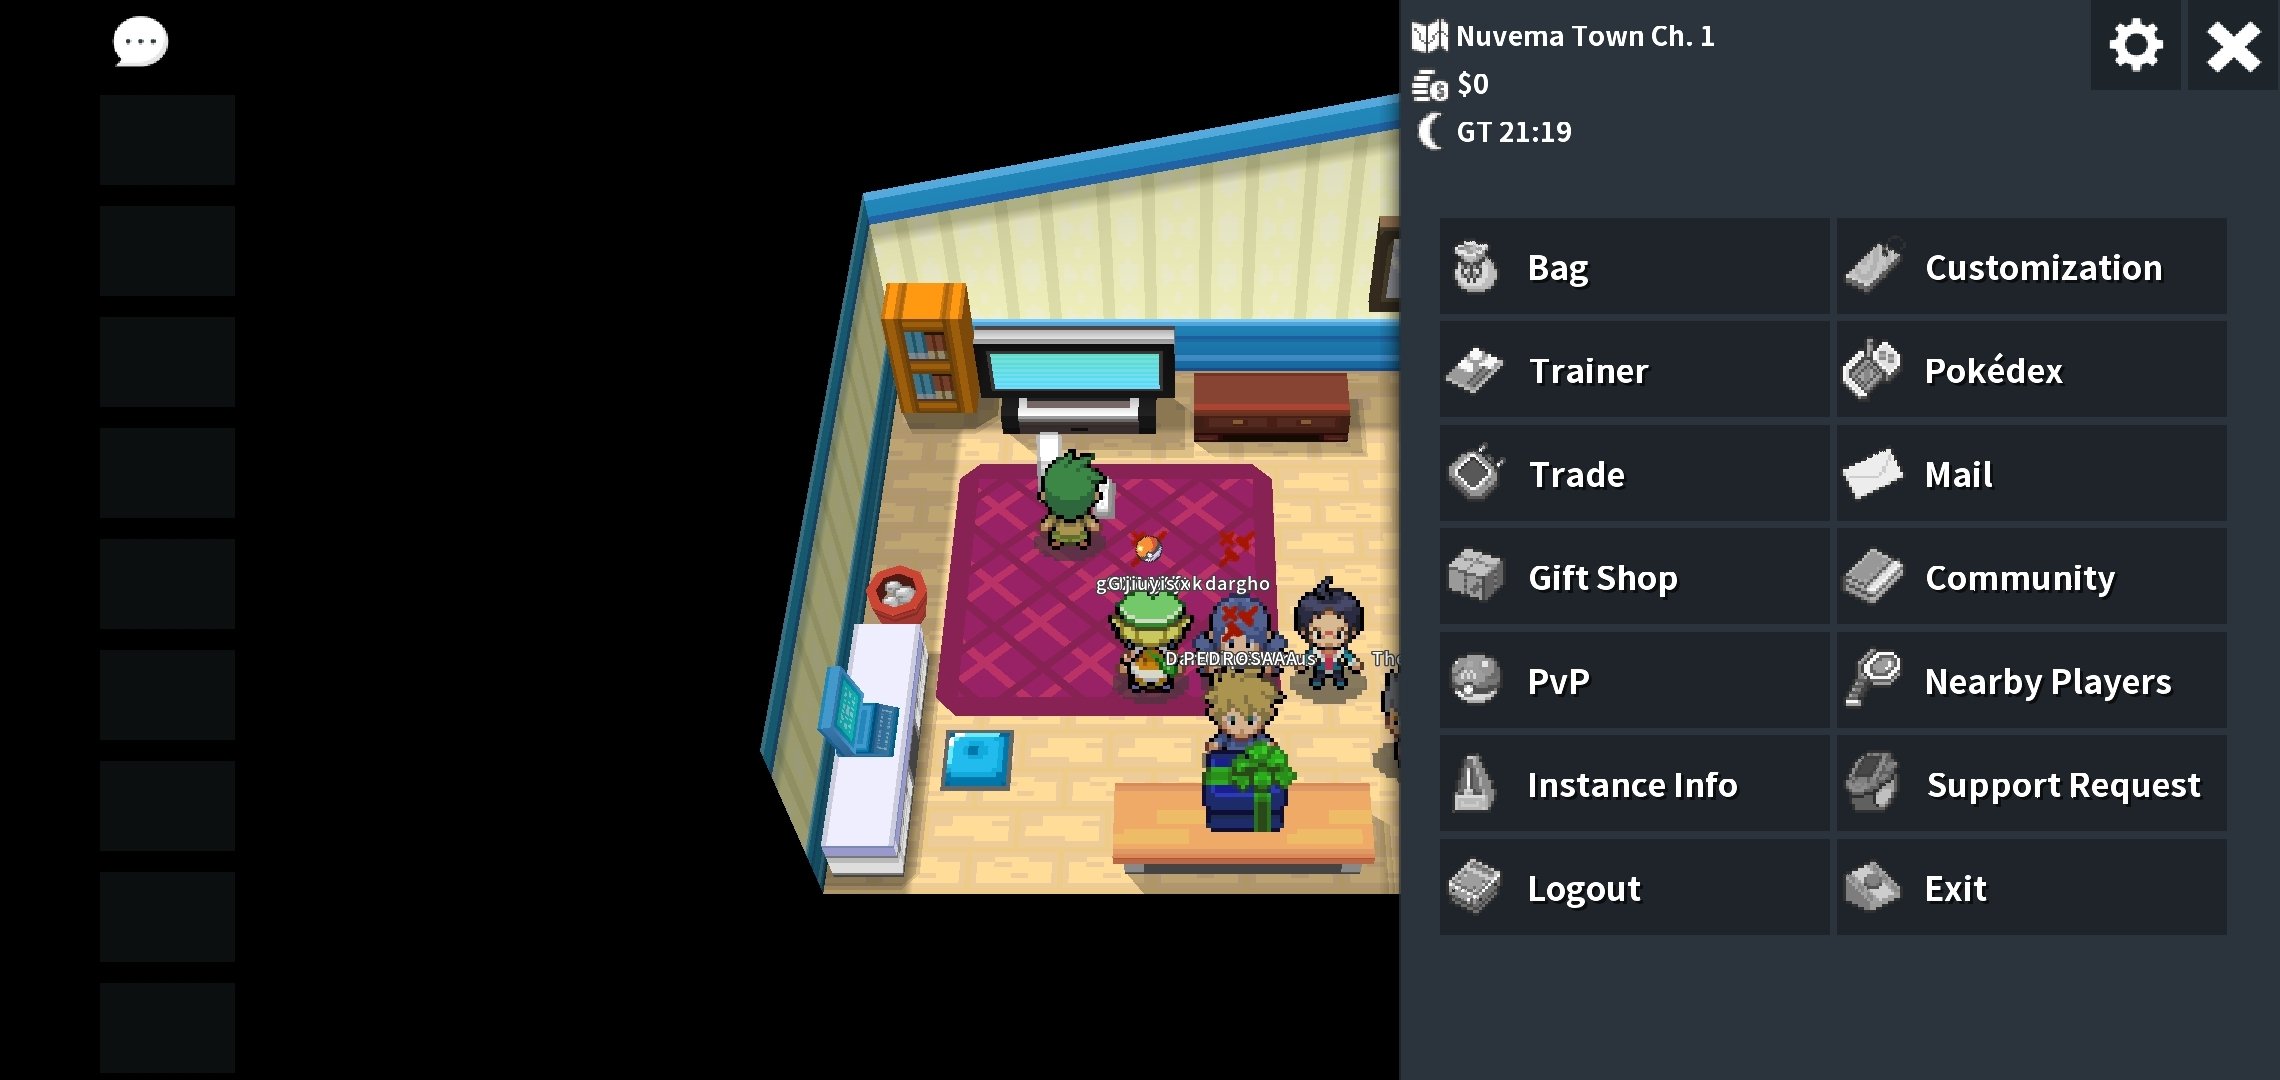 PokeMMO for Android - Download the APK from Uptodown